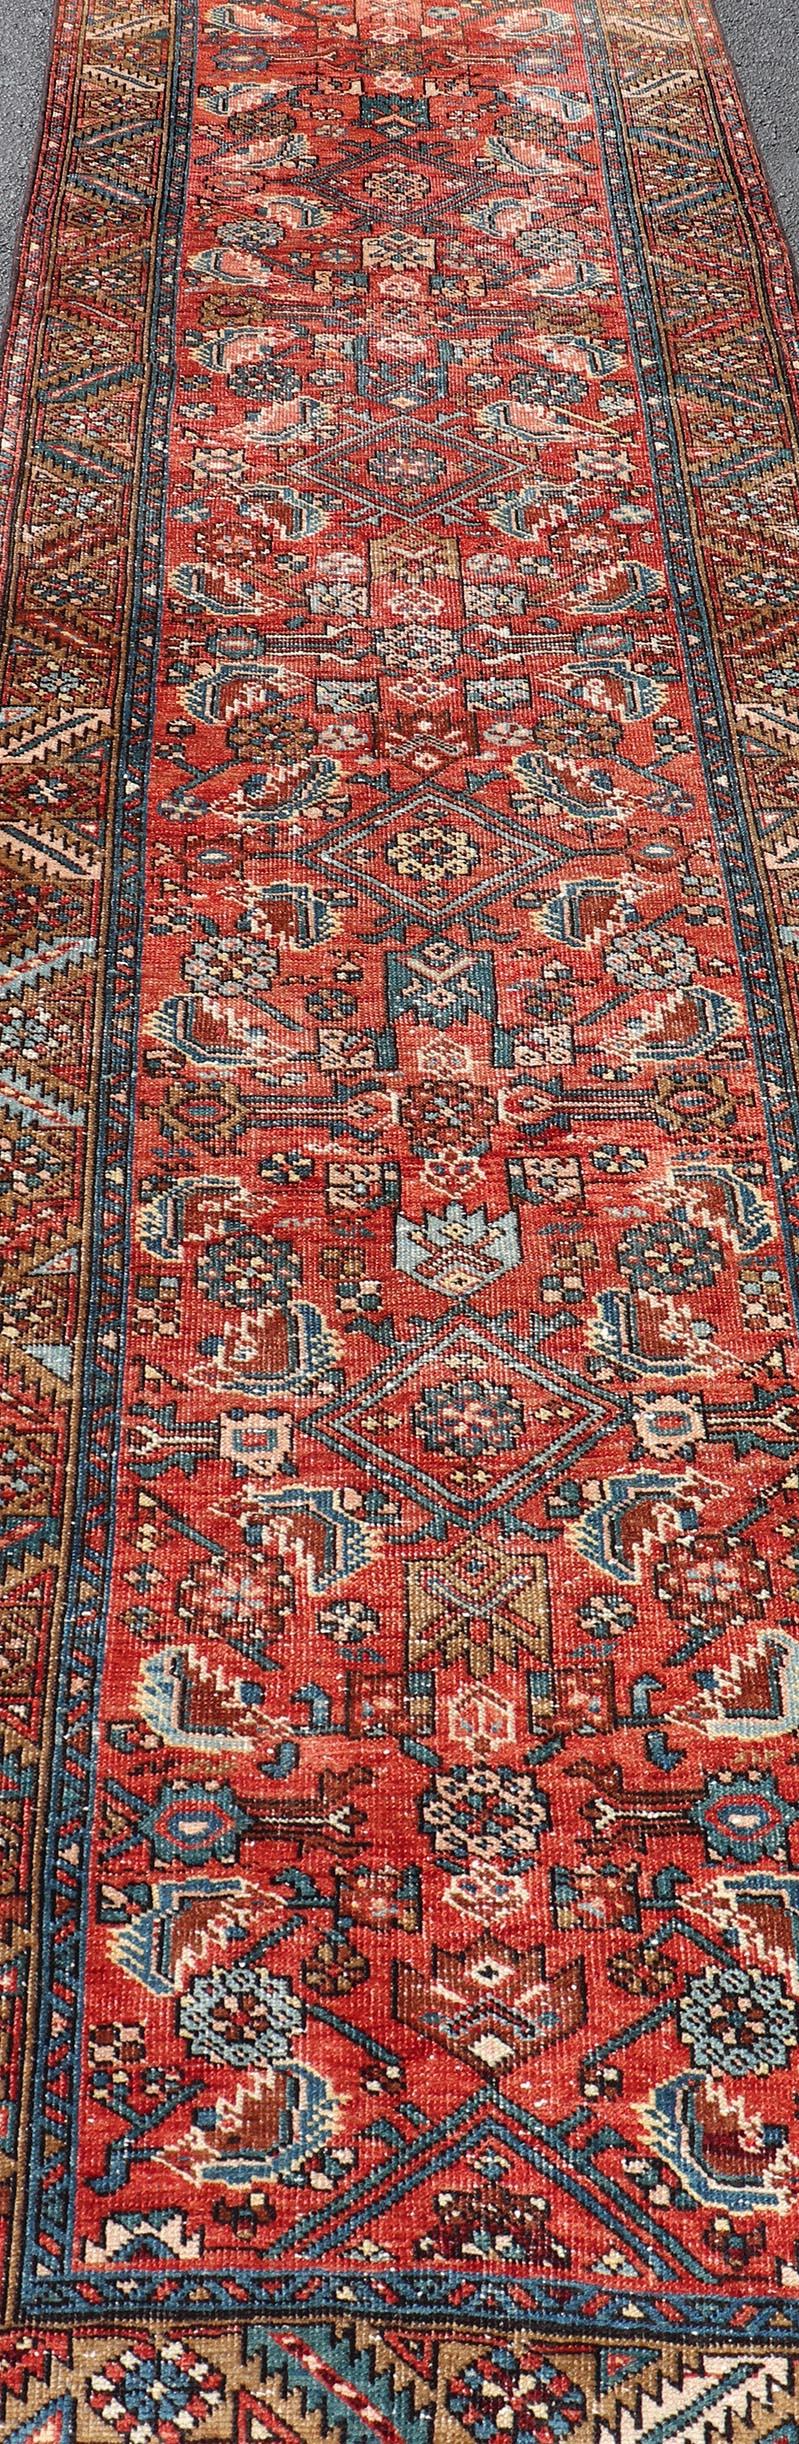 Antique Persian Heriz Runner with Colorful All-Over Stylized Floral Design For Sale 4